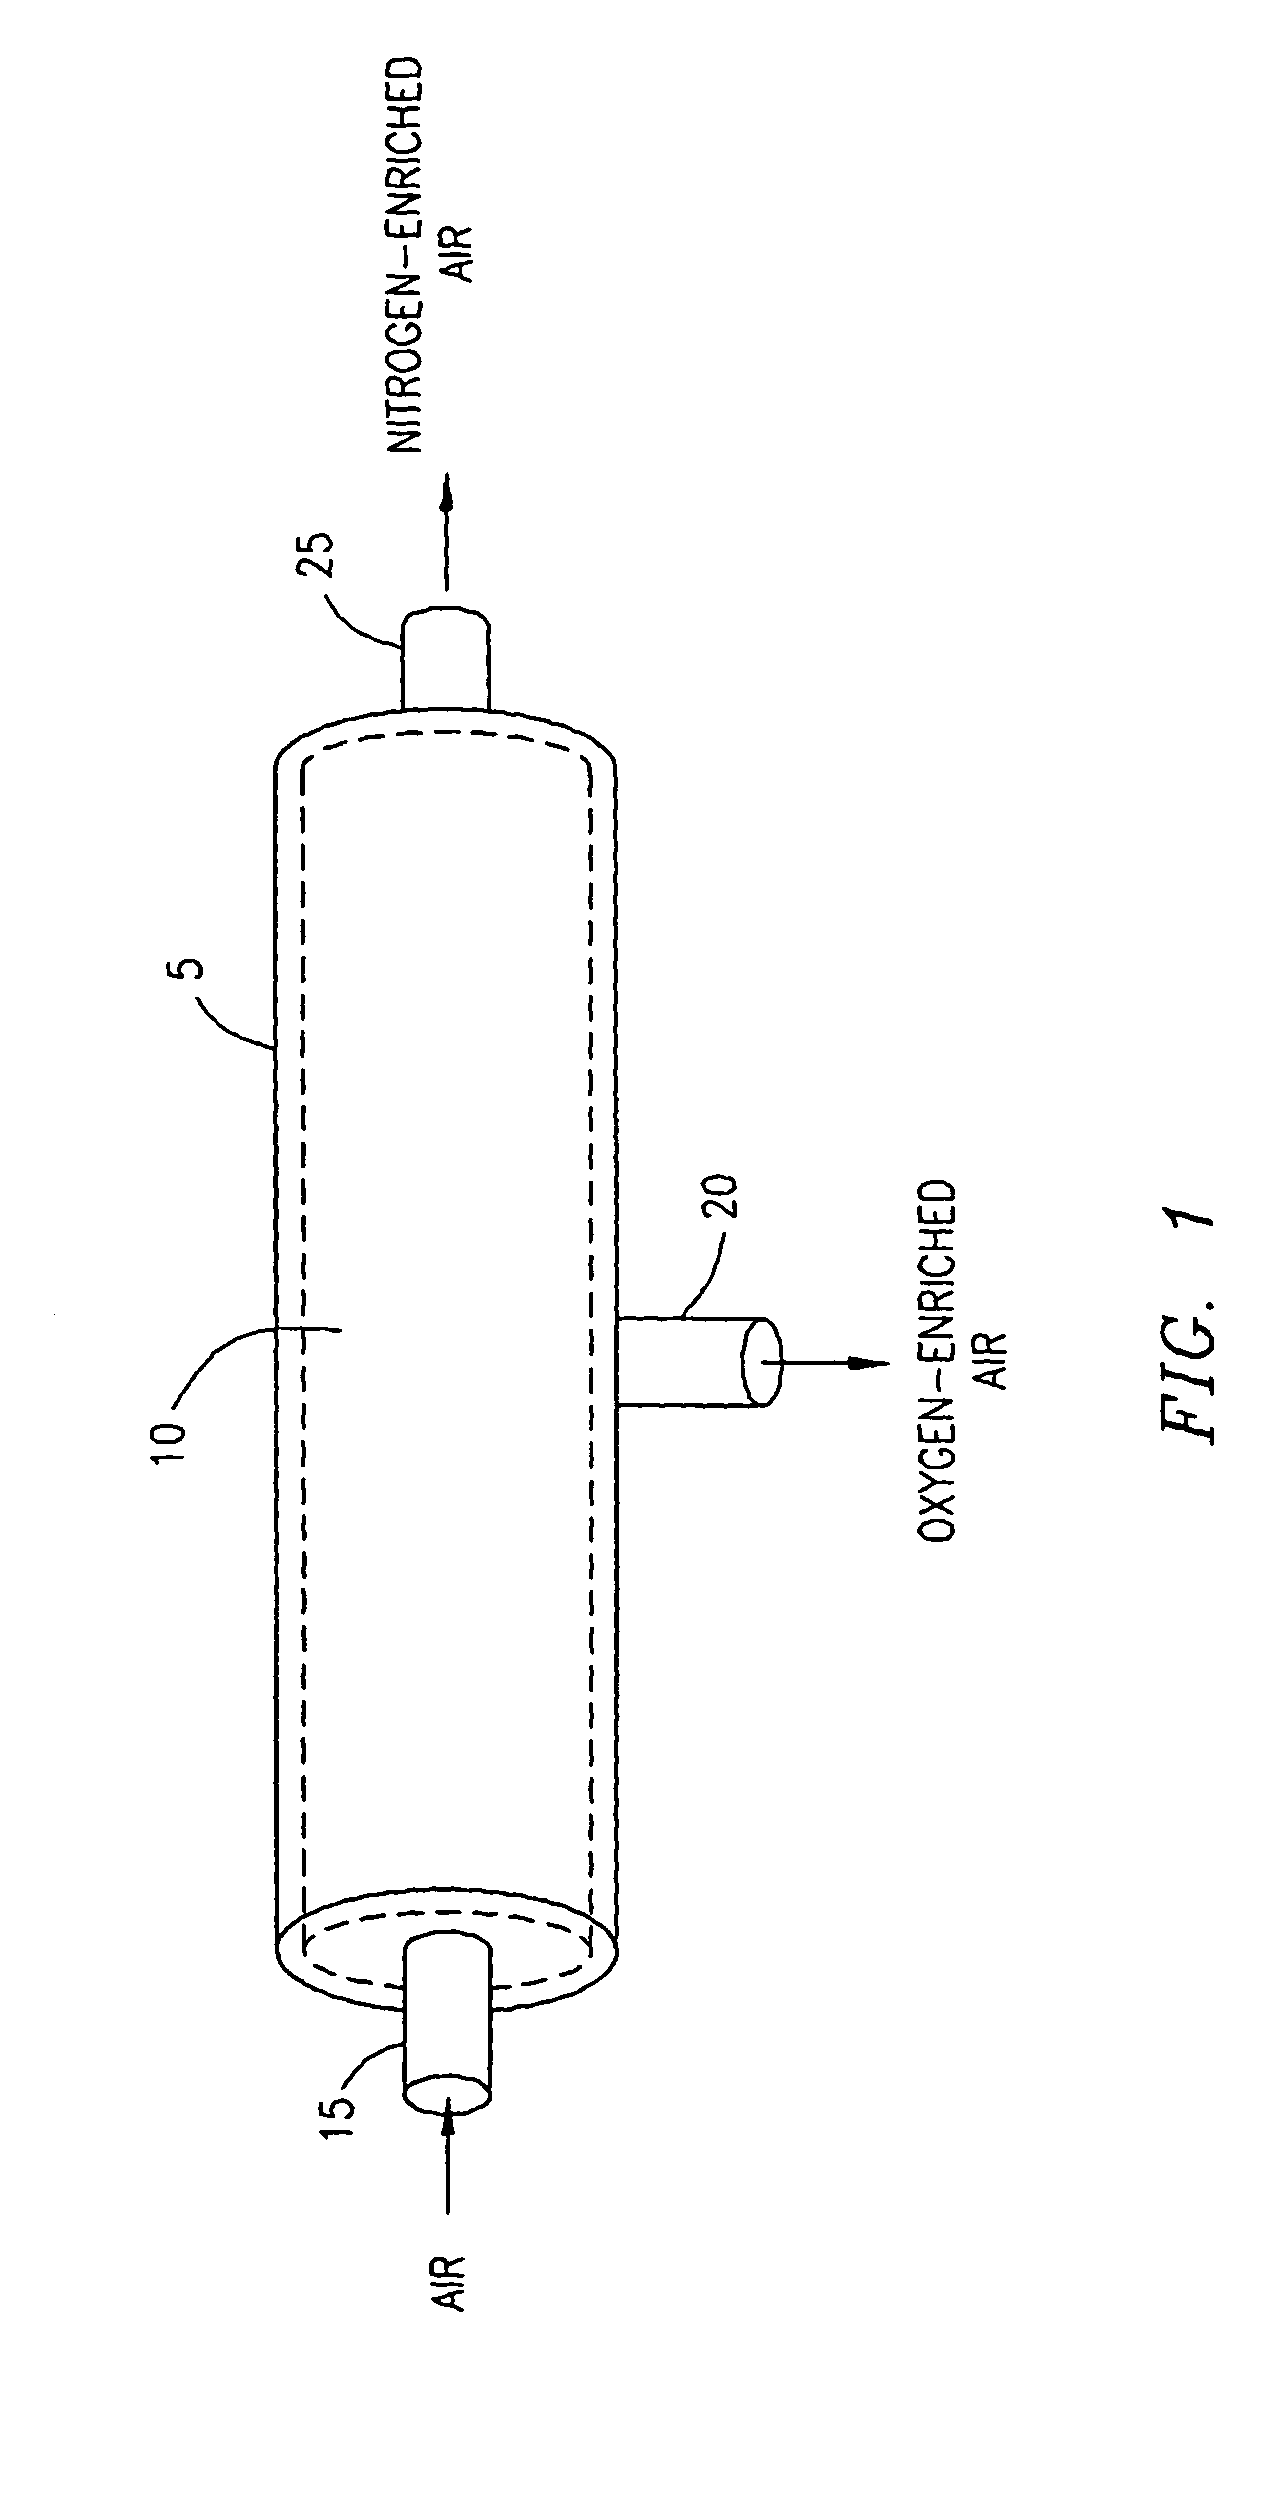 Method and apparatus for membrane separation of air into nitrogen and oxygen elements for use in internal combustion engines